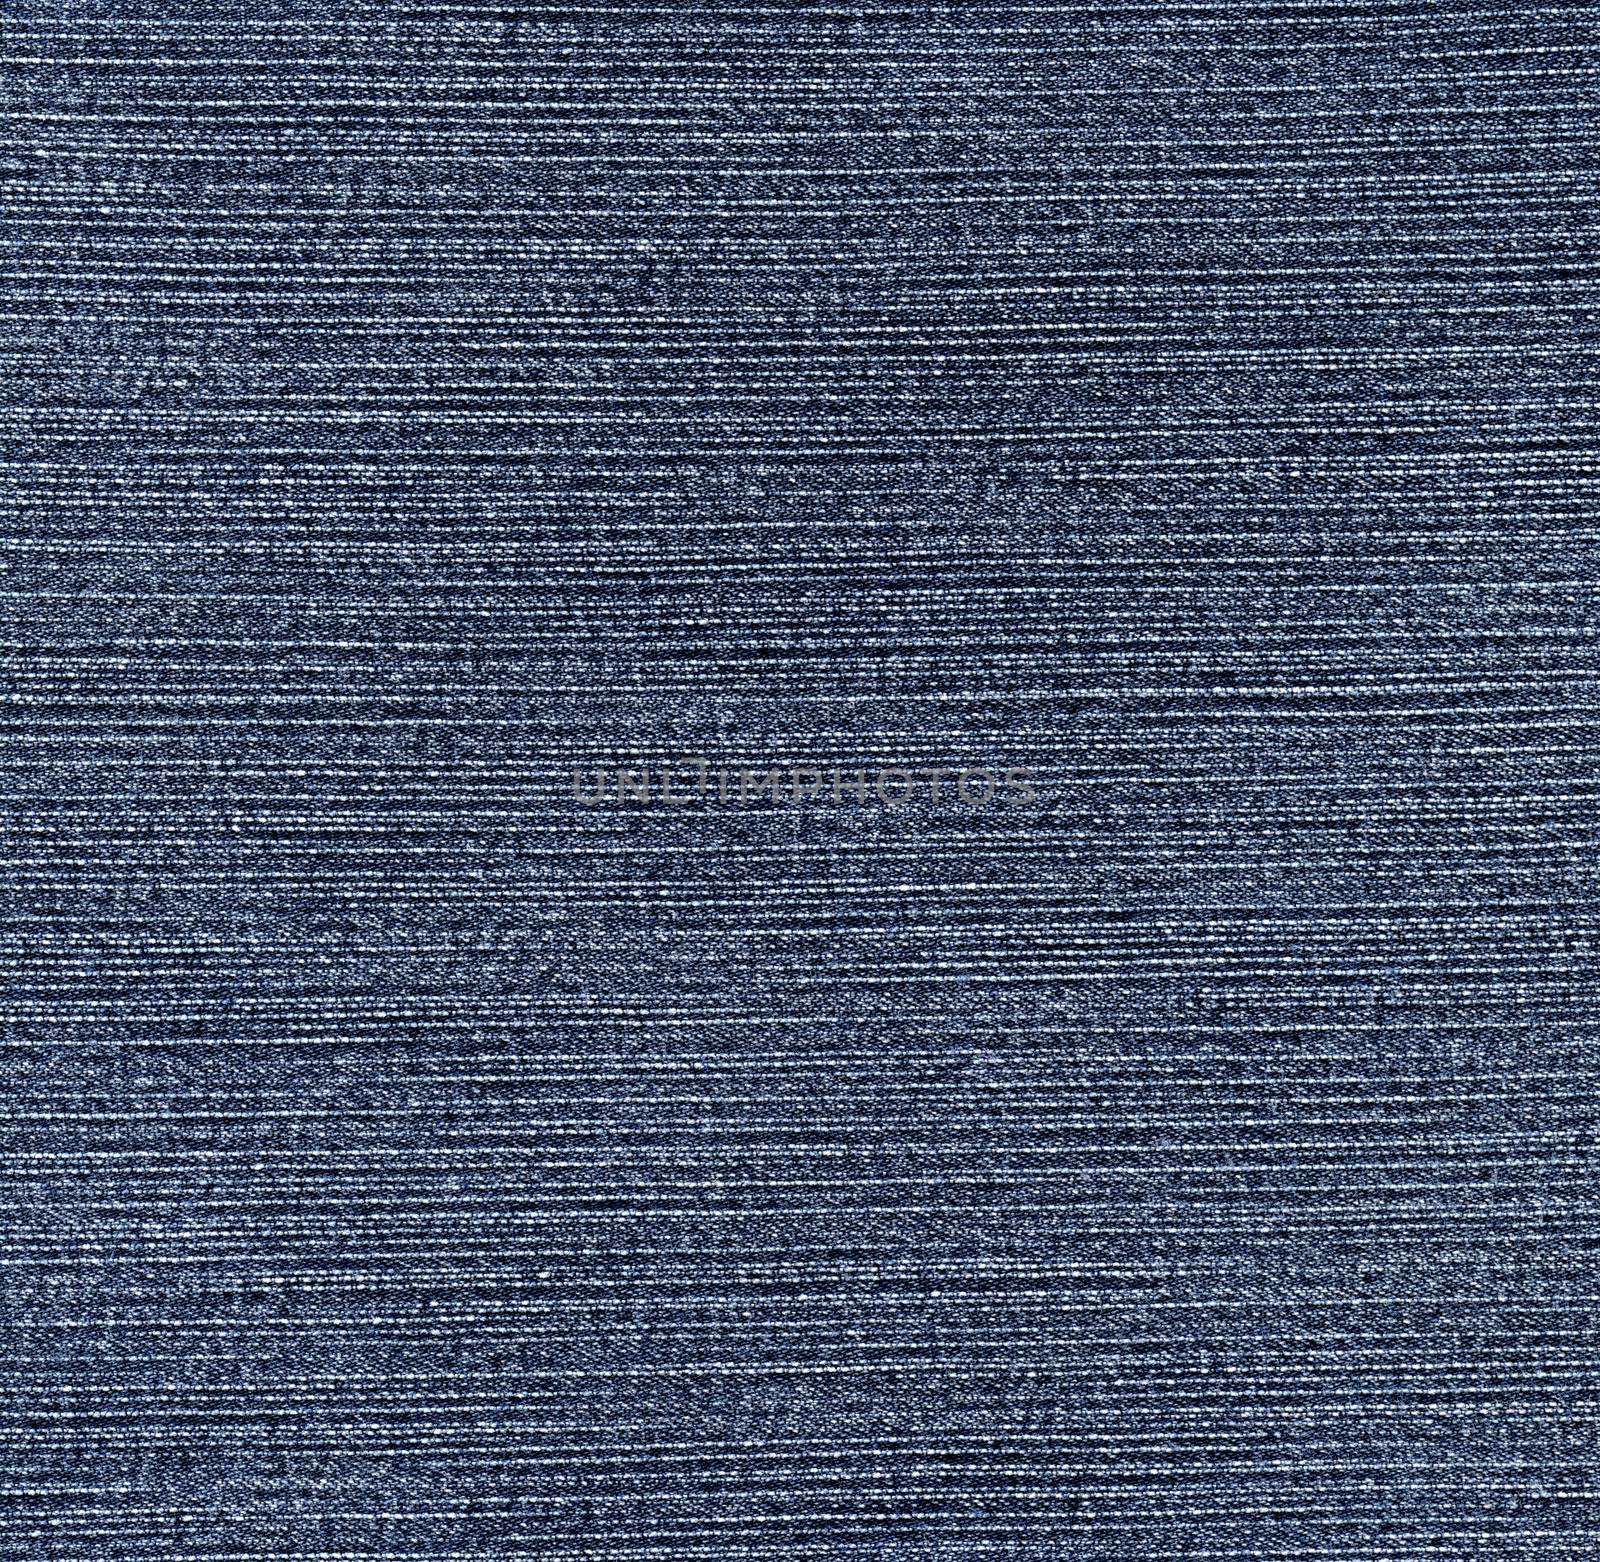 Denim Texture, Light Blue and Grey Jeans Background